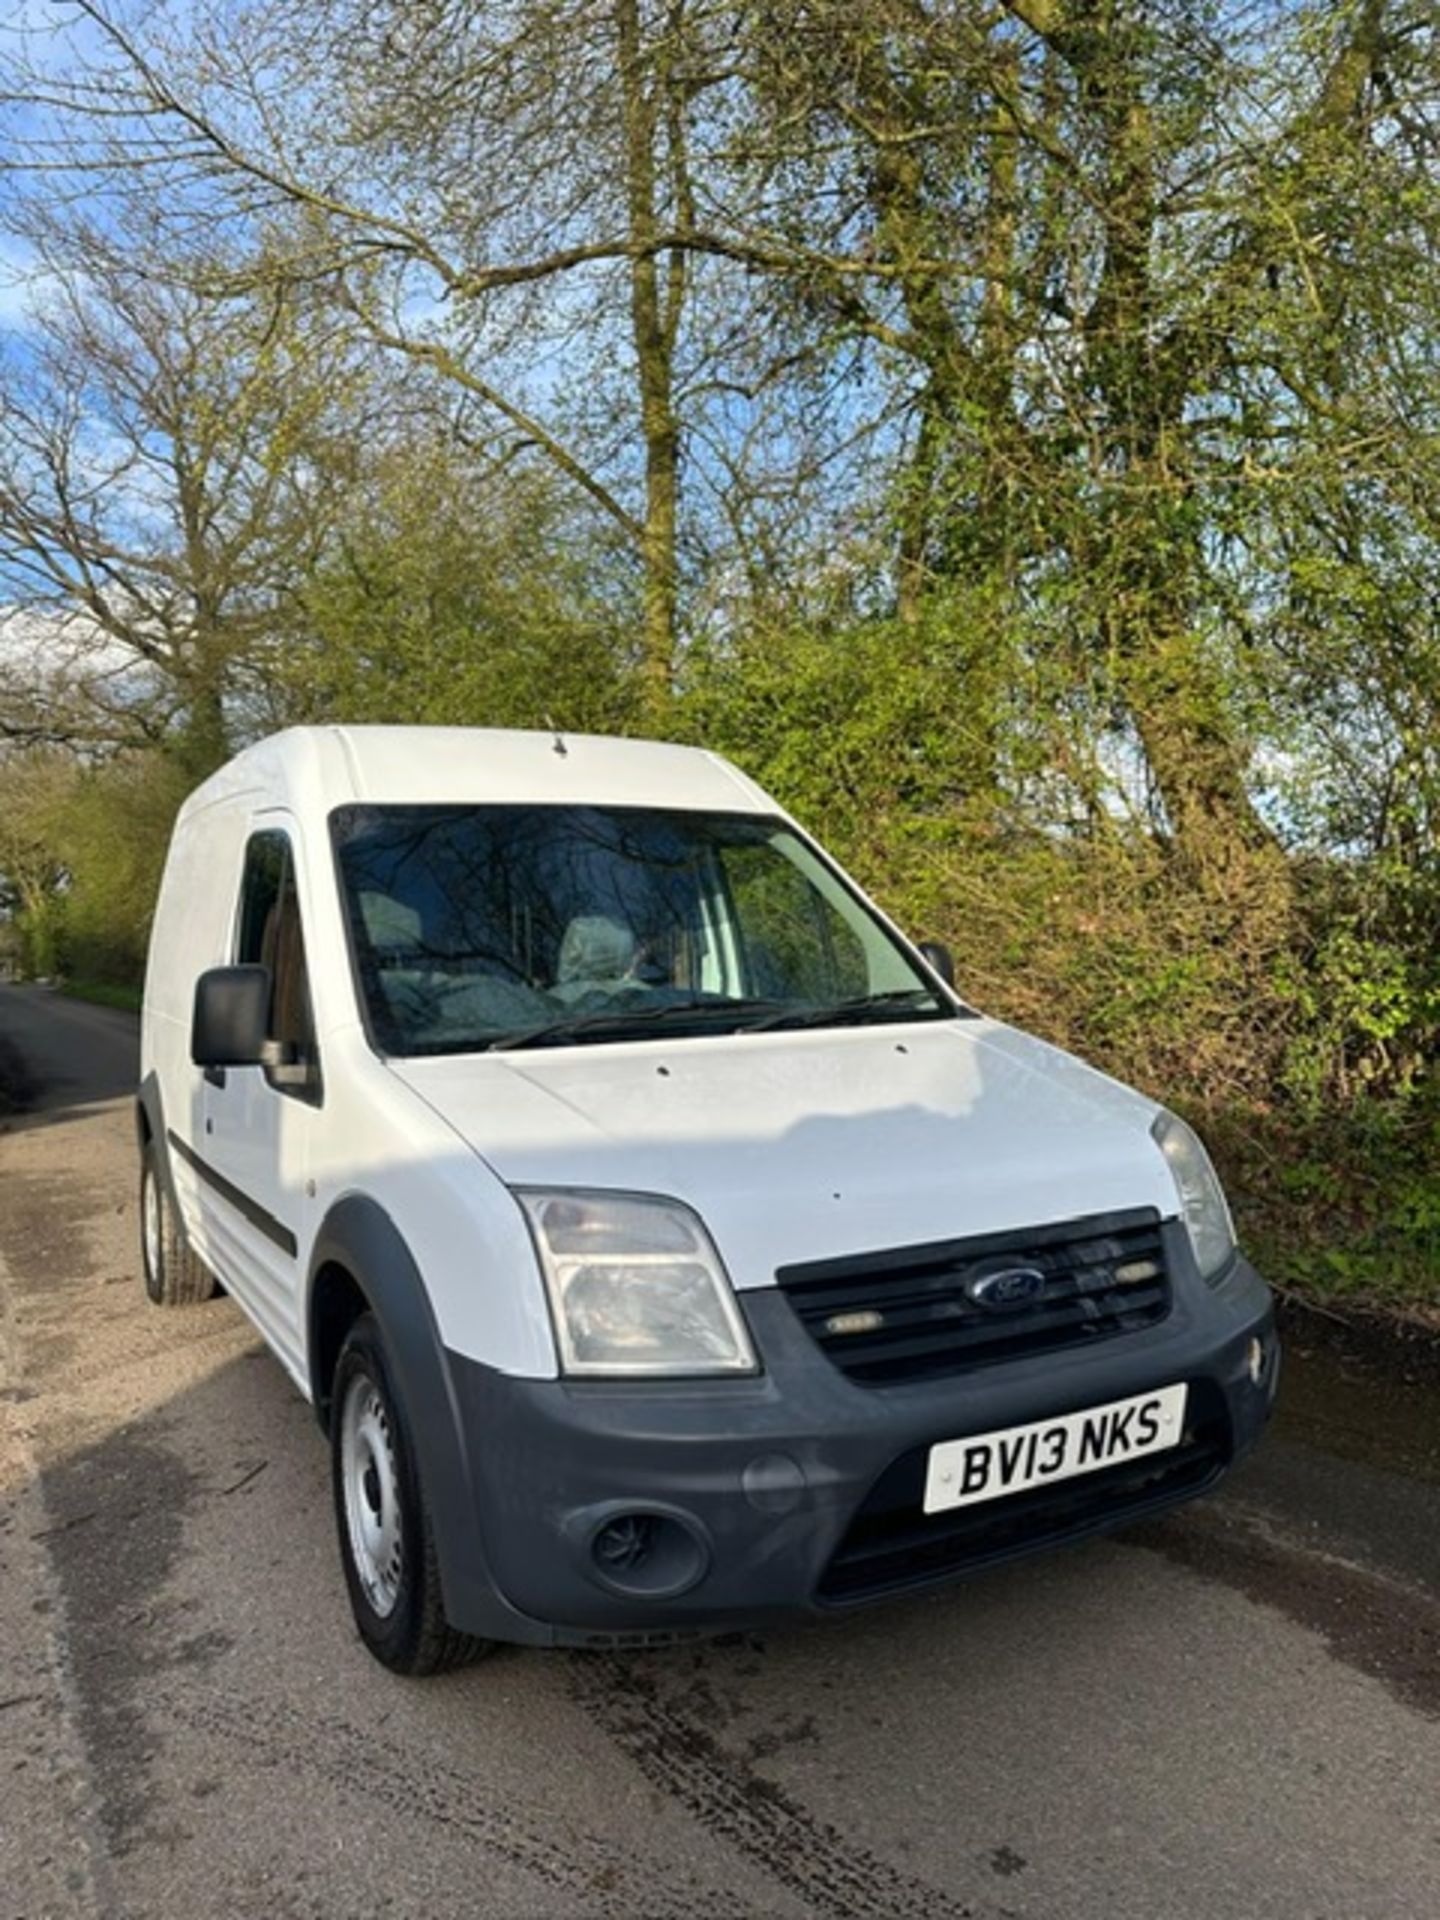 FORD TRANSIT CONNECT PANEL VAN REG:BV13 NKS 1.8LITRE. HIGH ROOF LWB. 83K REC MILES APPROX. WITH V5 A - Image 5 of 26